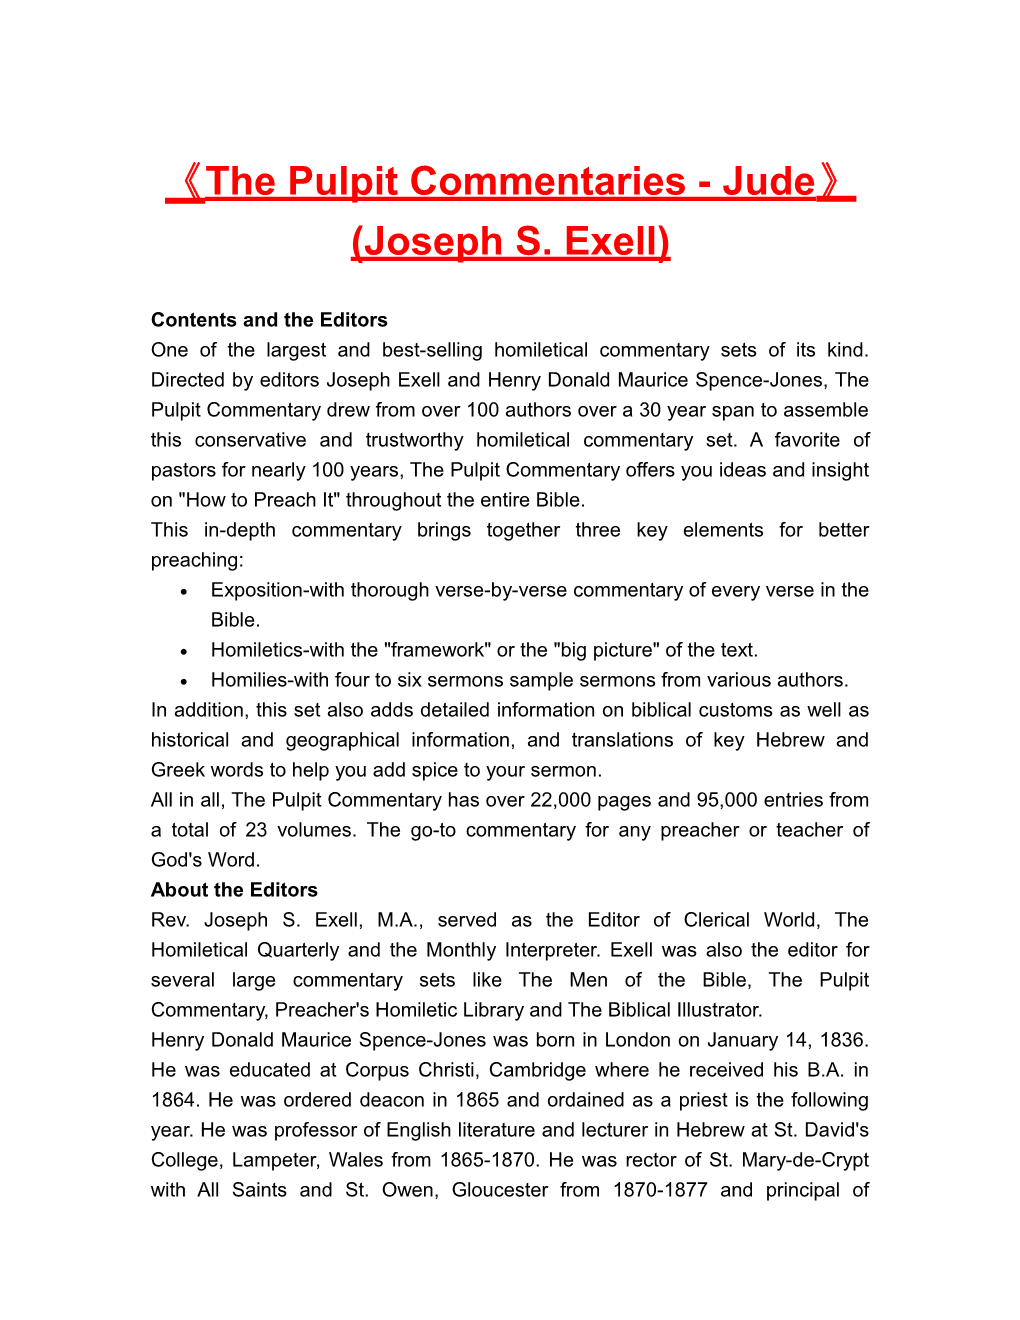 The Pulpit Commentaries - Jude (Joseph S. Exell)